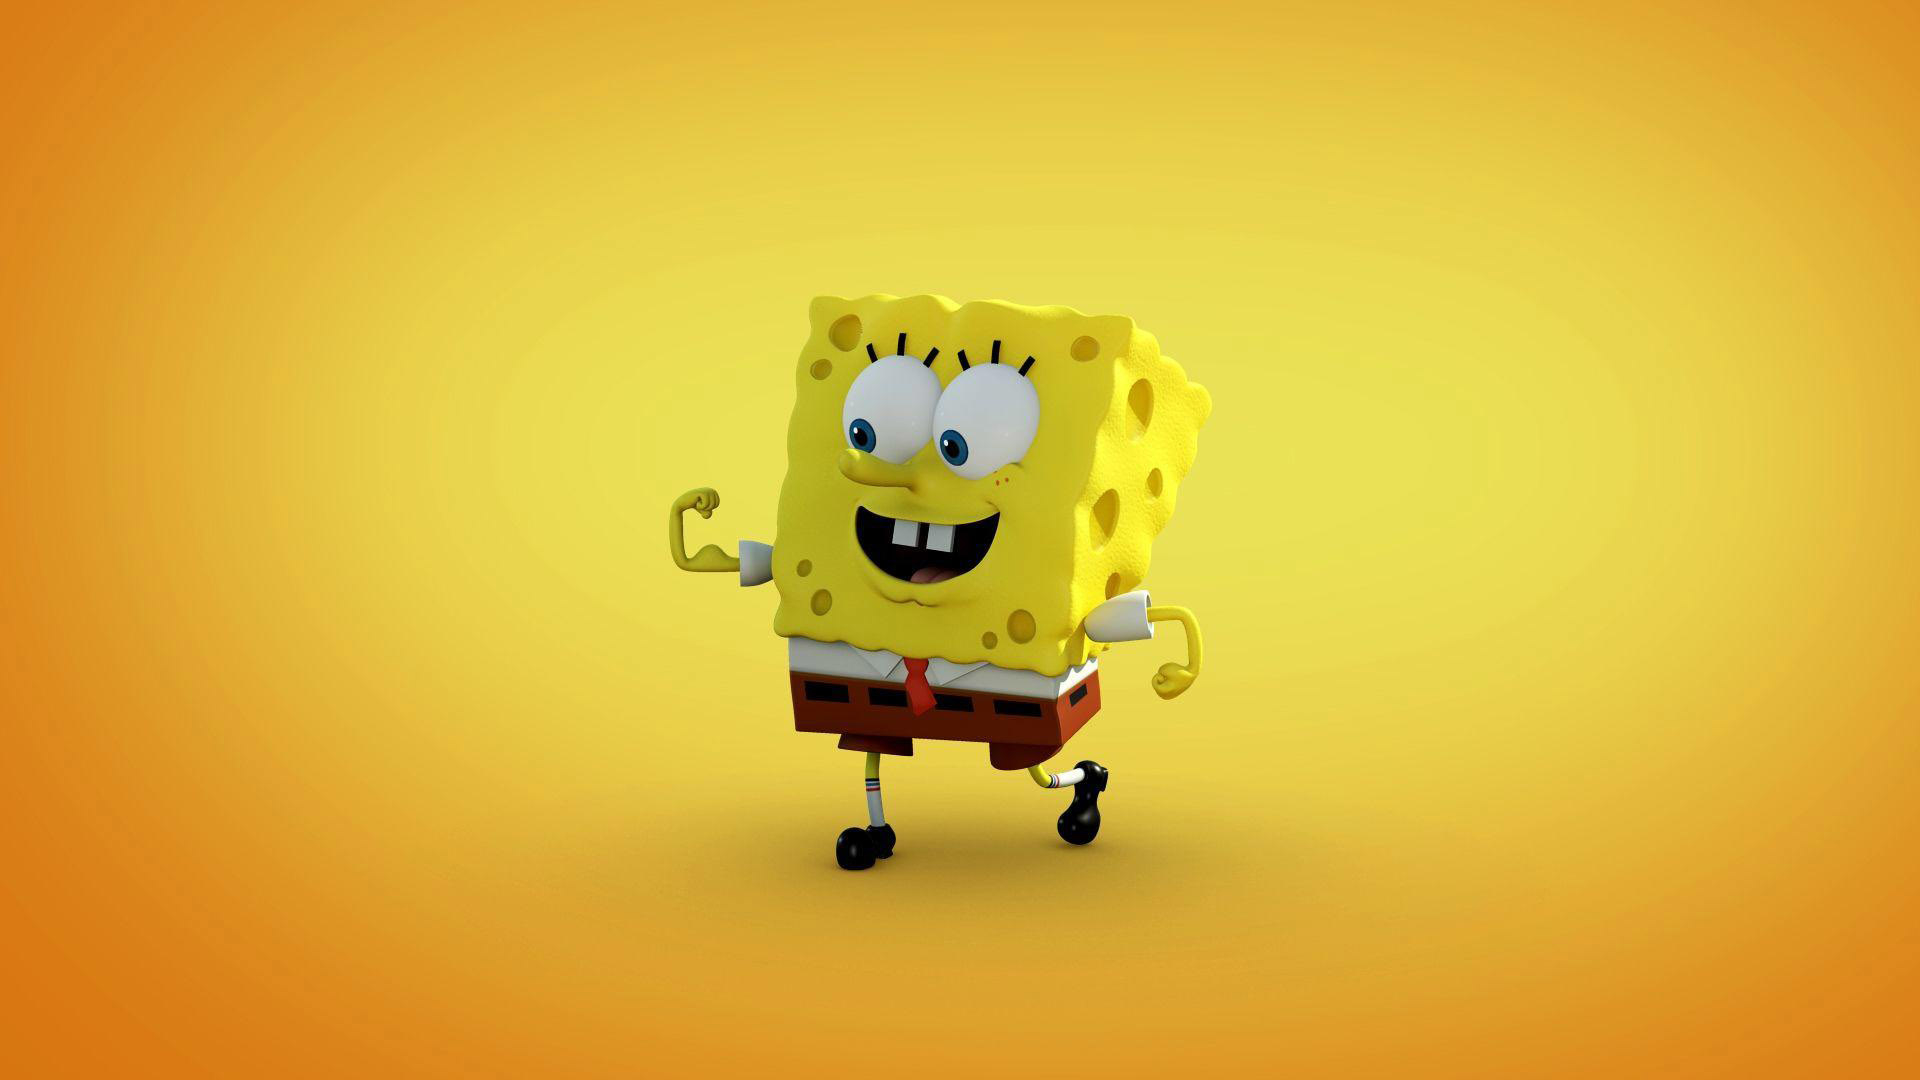 1680x10502019717 Spongebob With Red Tie 1680x10502019717 Resolution  Wallpaper, HD Cartoon 4K Wallpapers, Images, Photos and Background -  Wallpapers Den